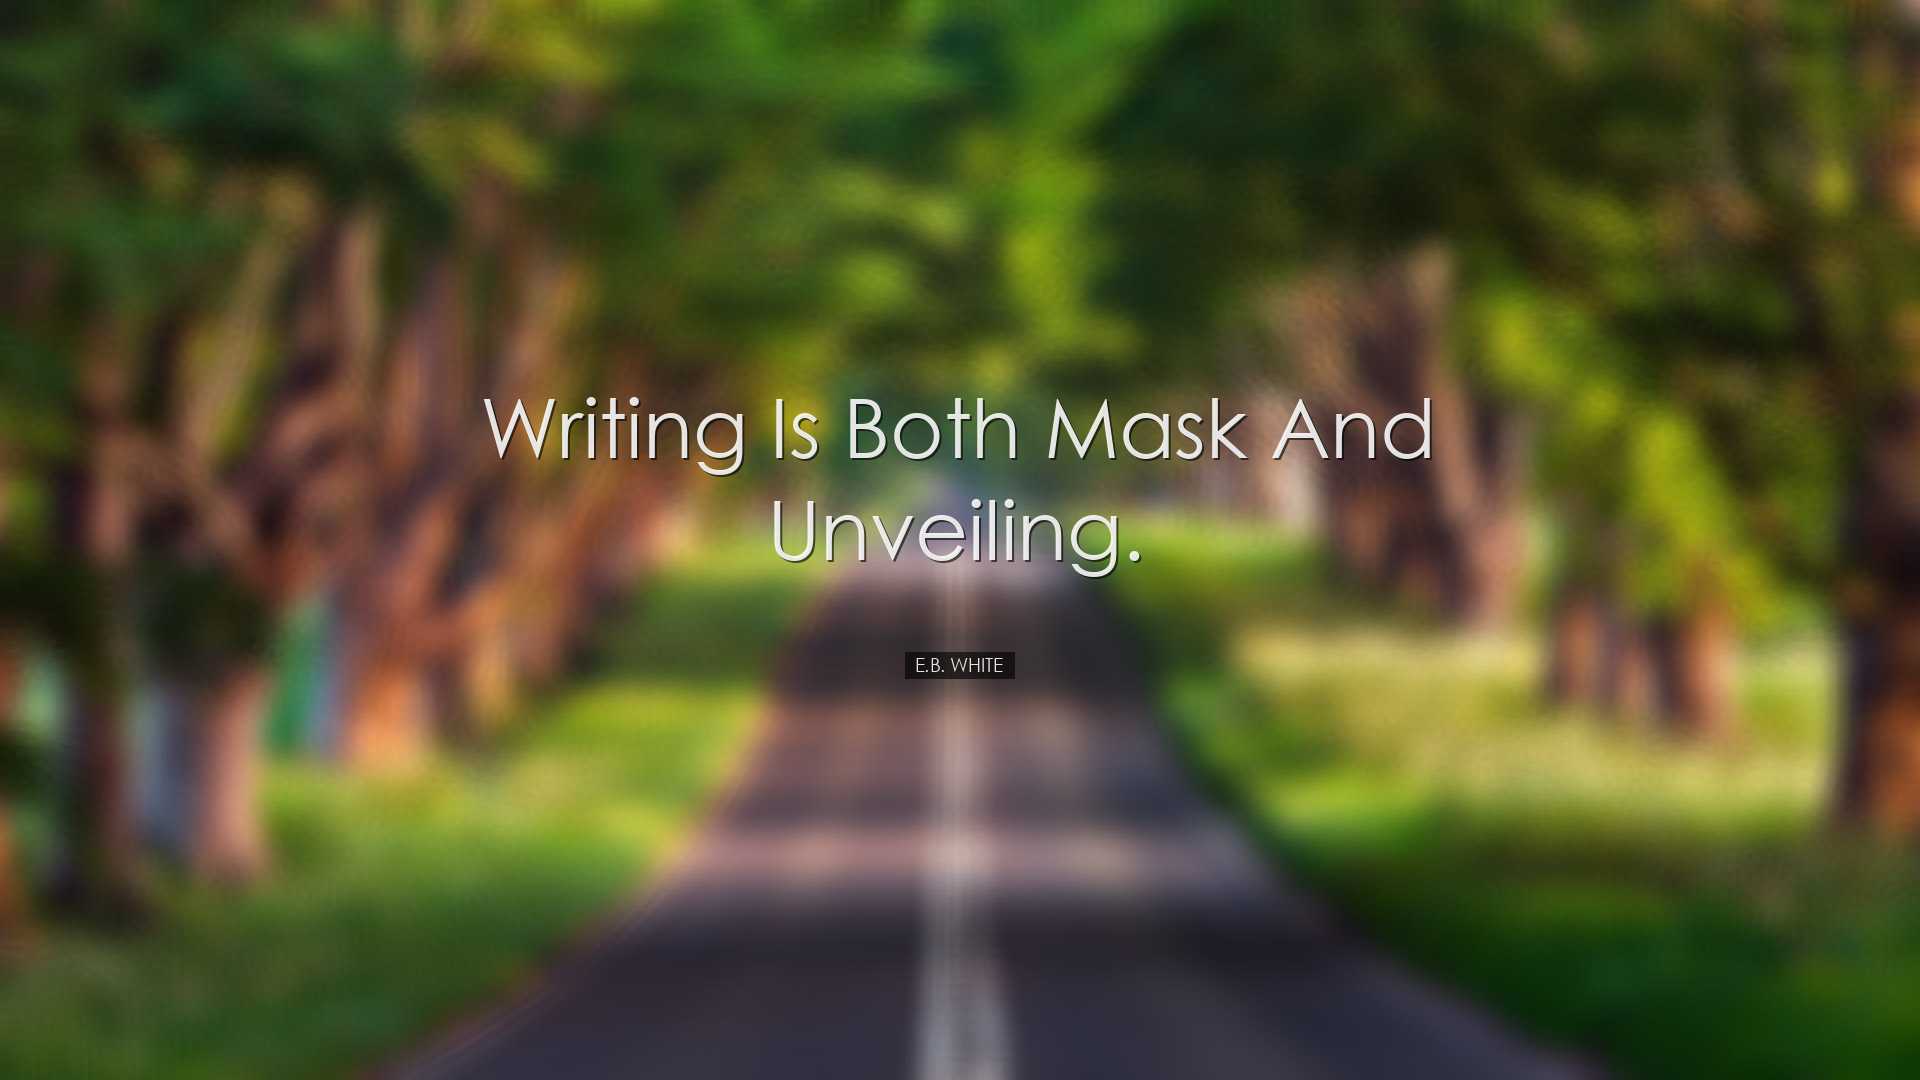 Writing is both mask and unveiling. - E.B. White